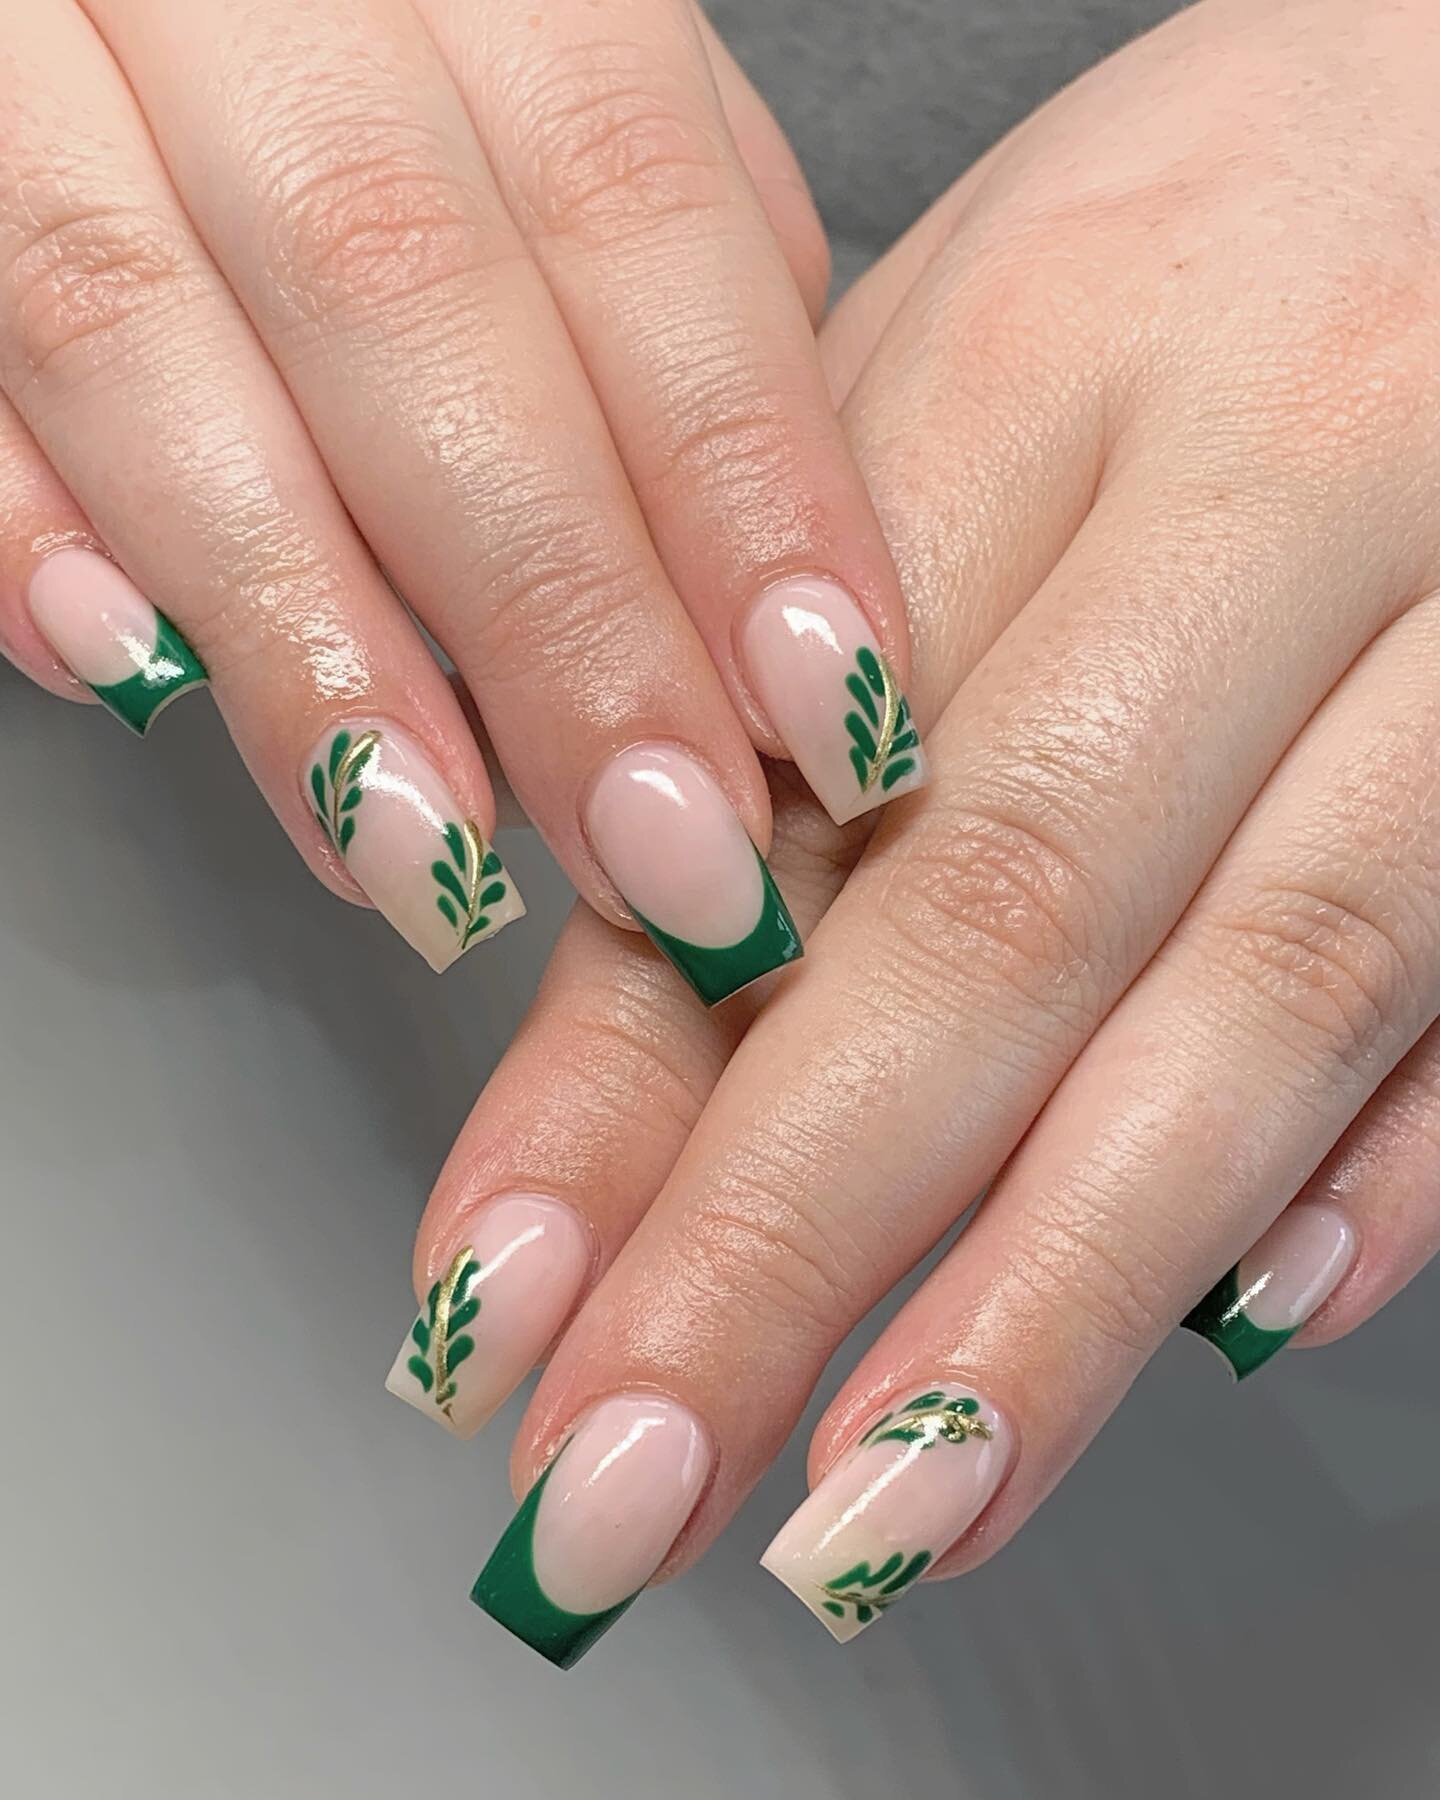 𝒯𝒽𝒾𝓈 𝑔𝓇𝑒𝑒𝓃💚𝒾𝓈 𝒶 𝓌𝒽𝑜𝓁𝑒 🎄ᗰEᖇᖇY ᗰOOᗪ 🎄

💚 book ahead, appointment available online, link ⬆️ or www.Luxynails.ca 

💚New times and dates OPEN to accommodate everyone in DECEMBER

💚please be mindful, if you can&rsquo;t make it to you